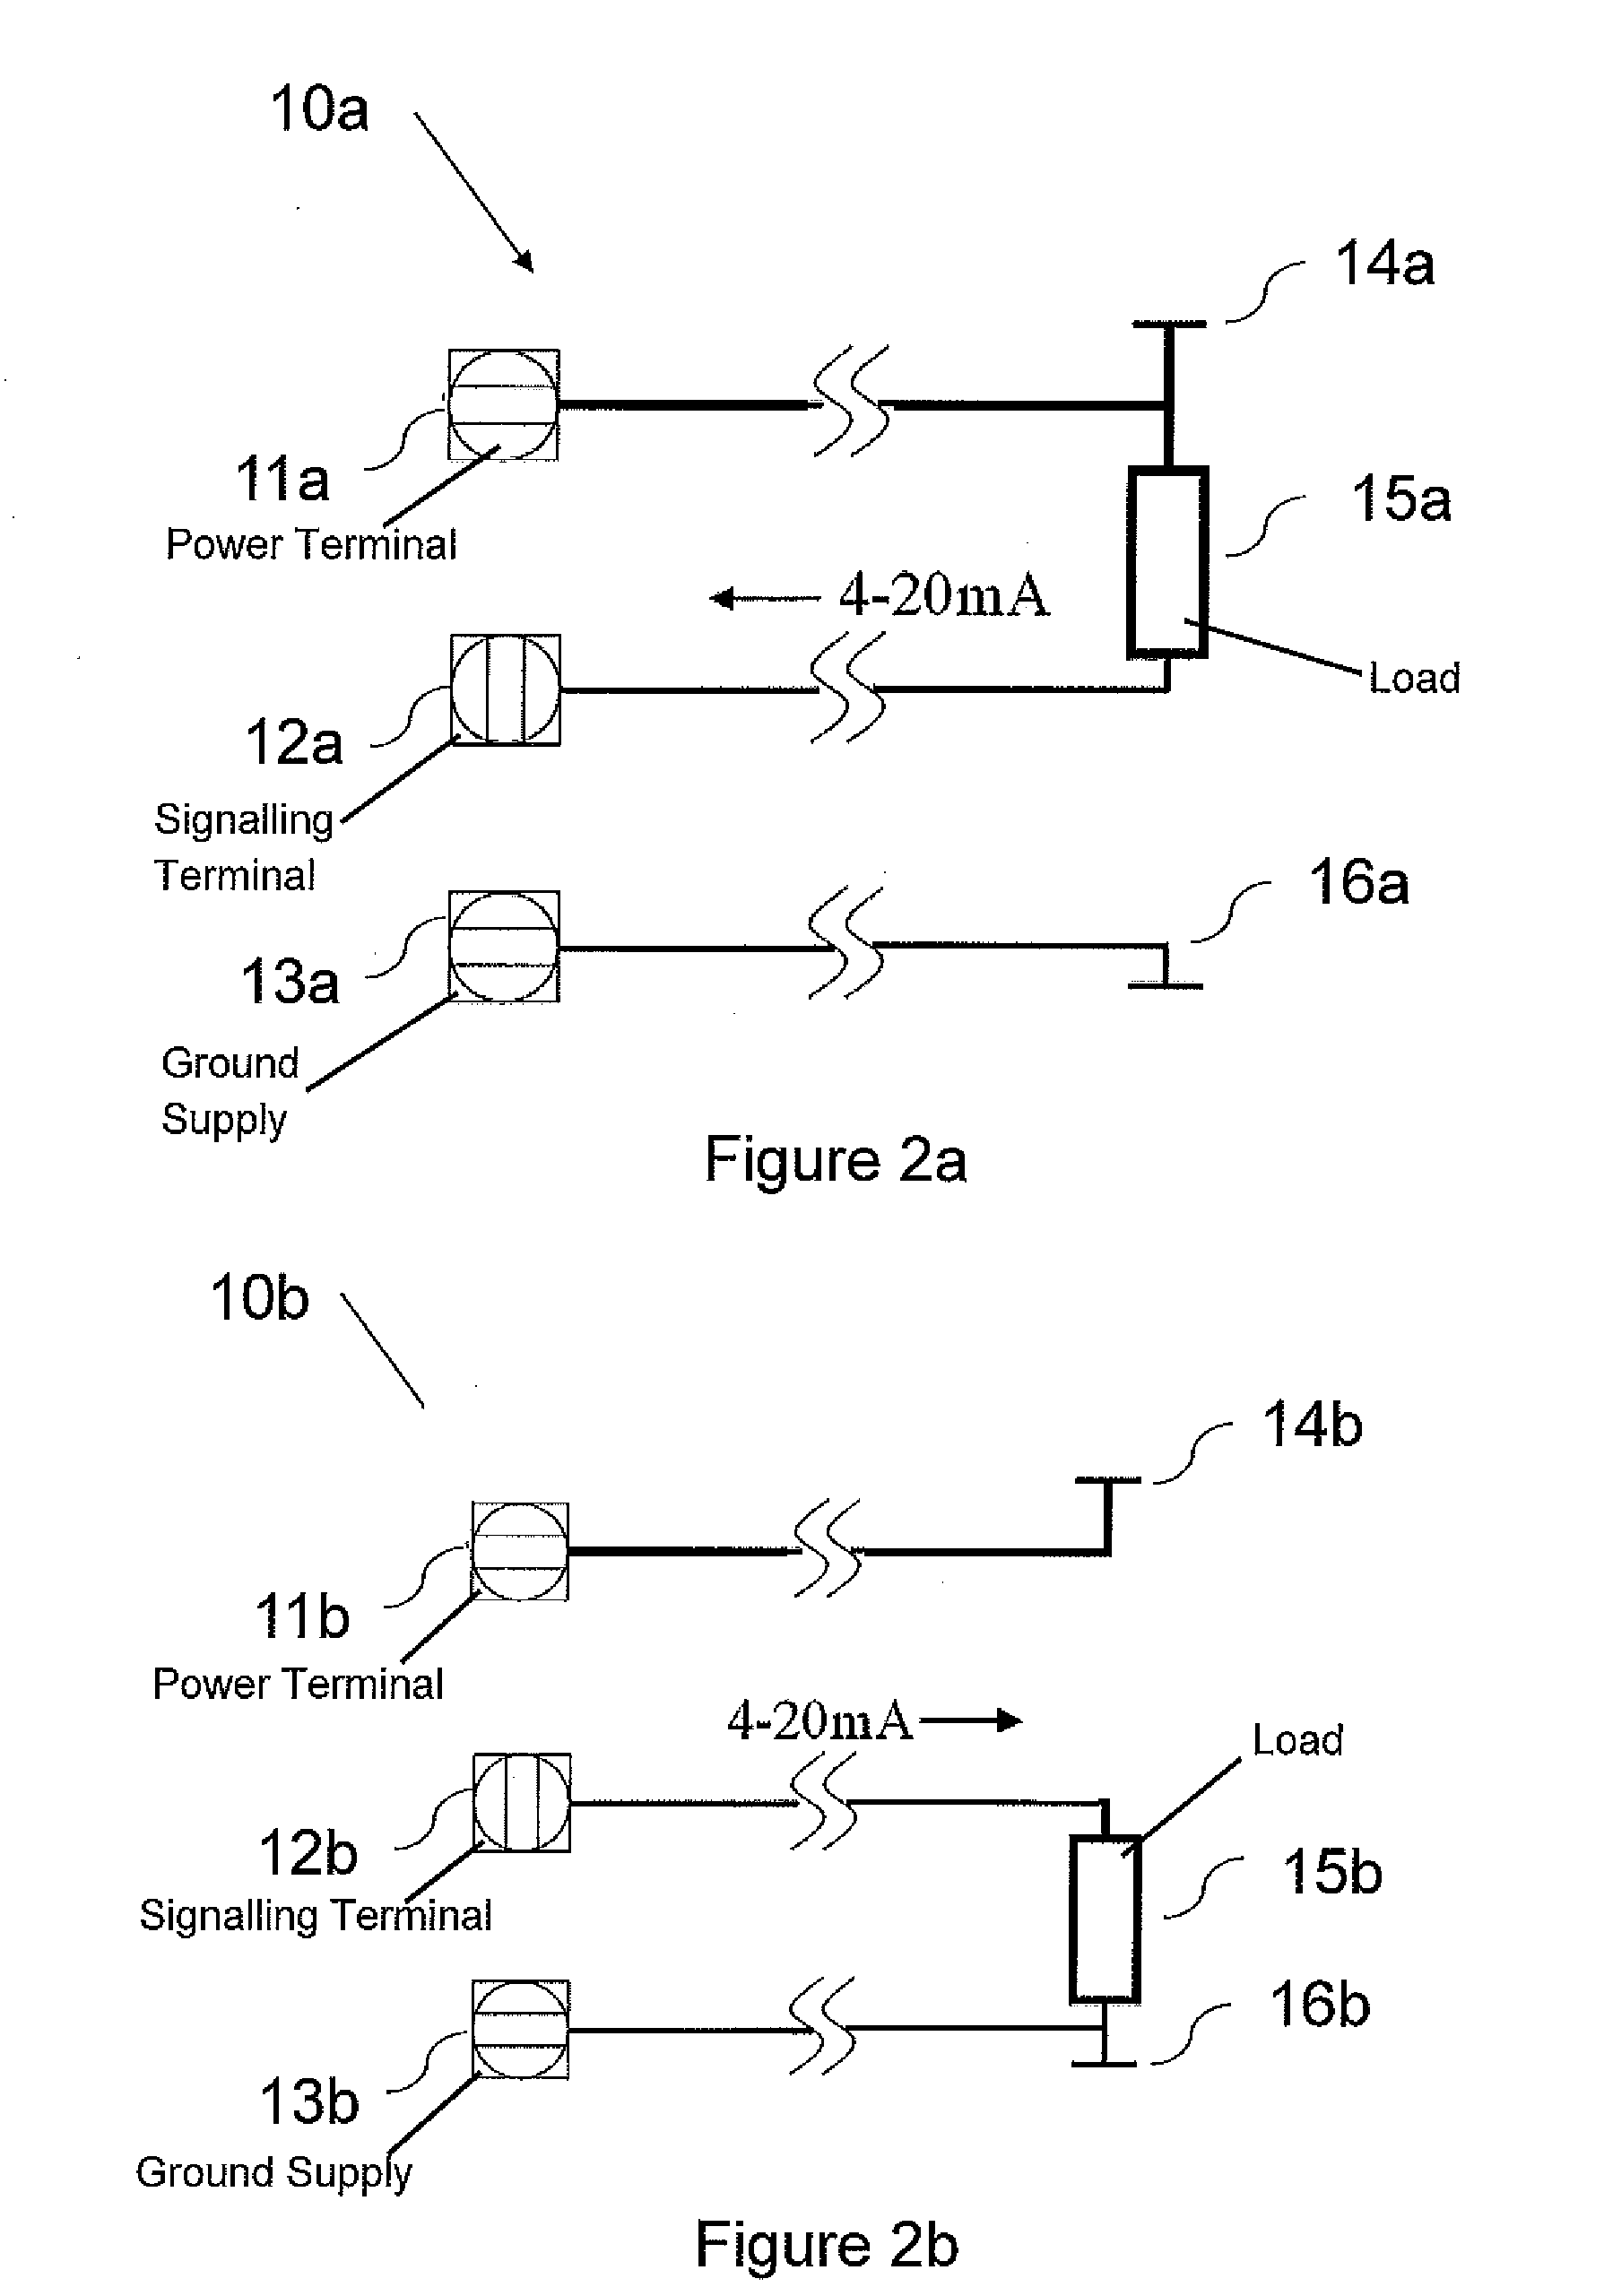 Apparatus and method for selectively determining a mode of operation